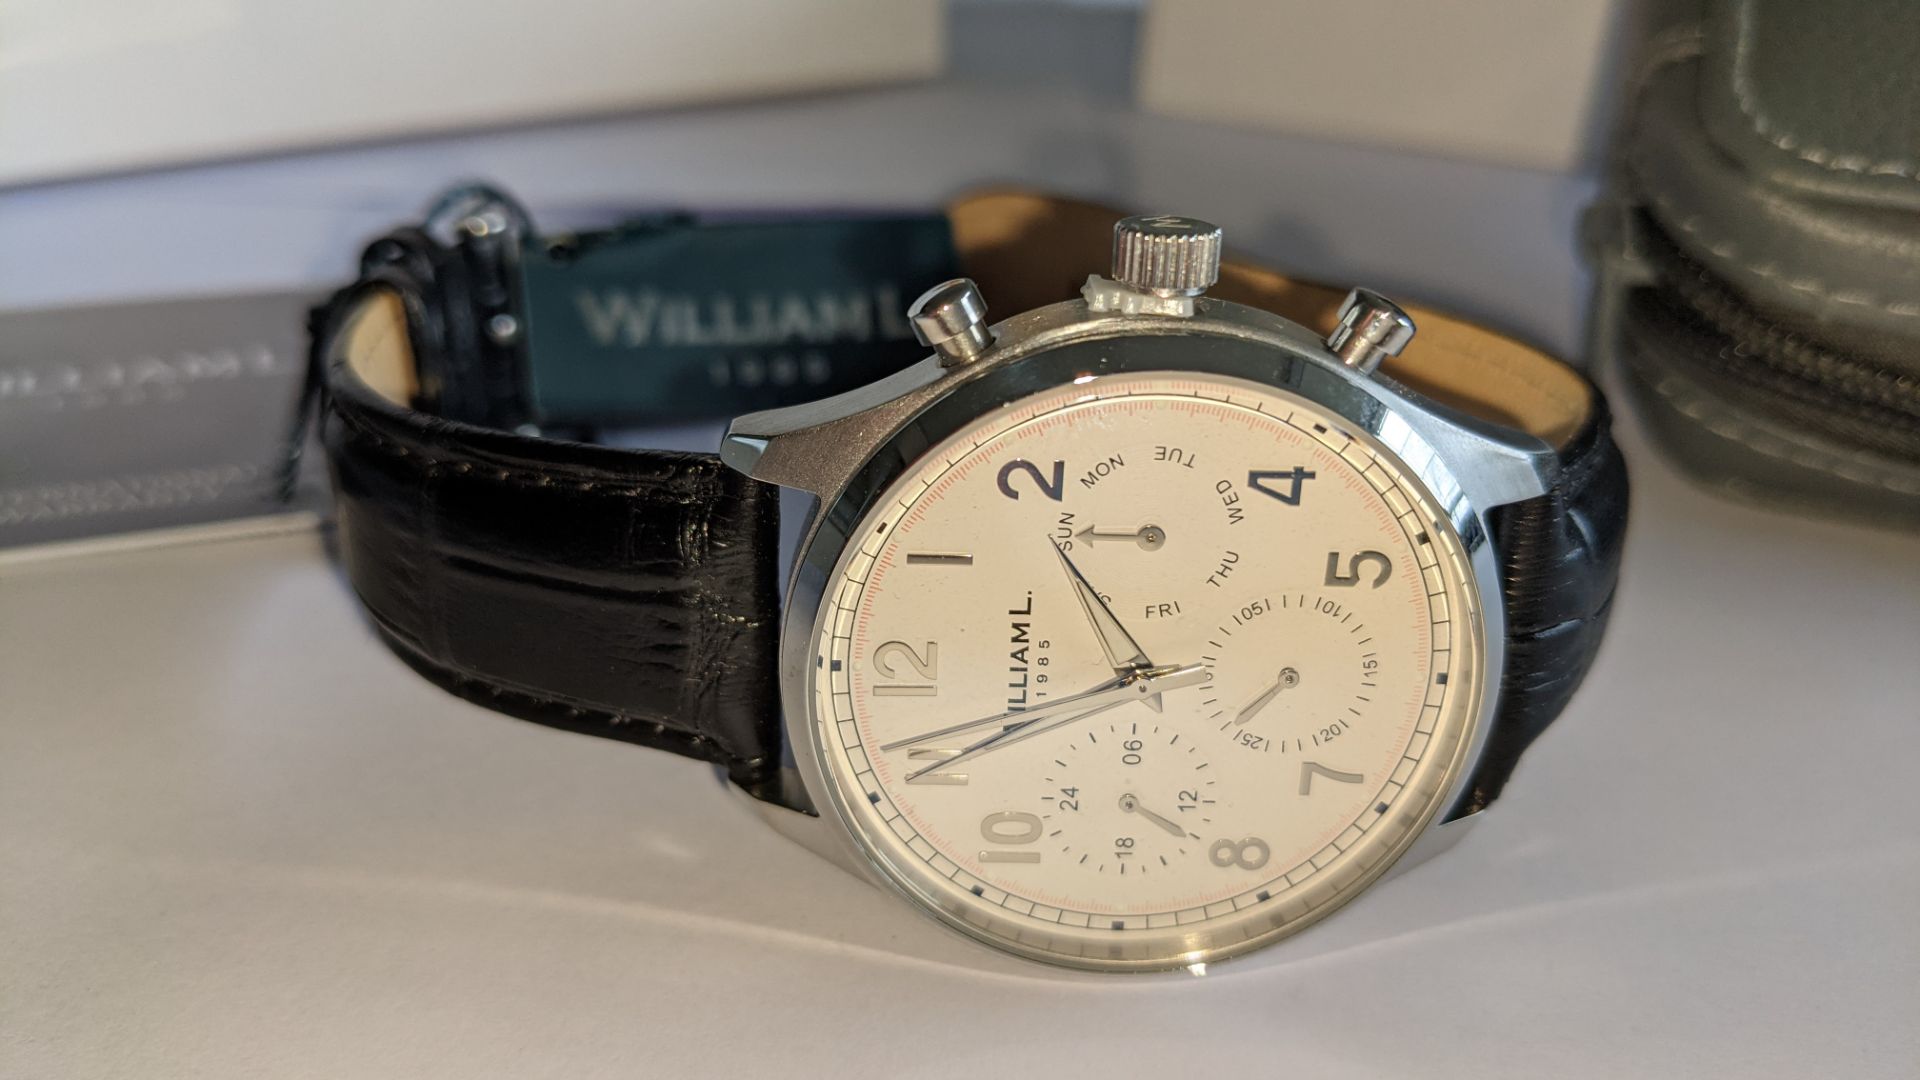 William L 1985 stainless steel watch, 5 ATM water resistant, leather strap, RRP £129. Includes box - Image 5 of 17